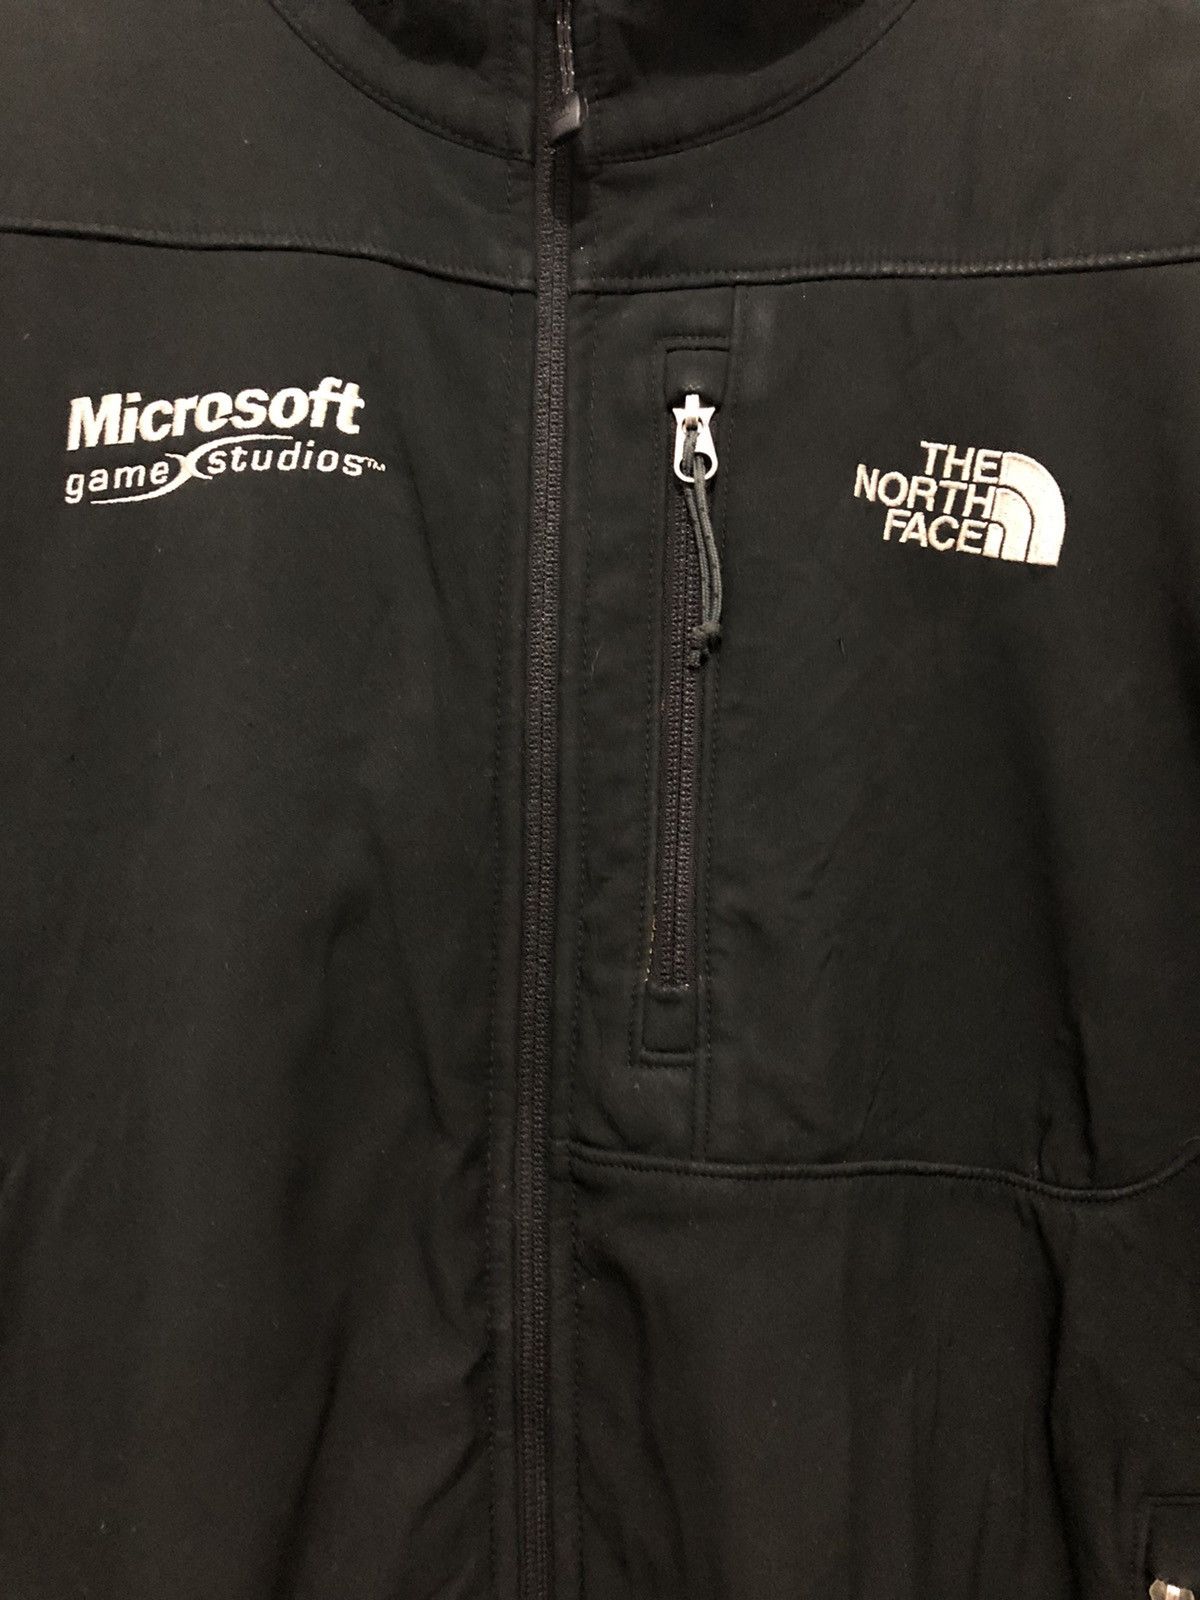 The North Face X Microsoft Game Studios Jacket 2007 - 4